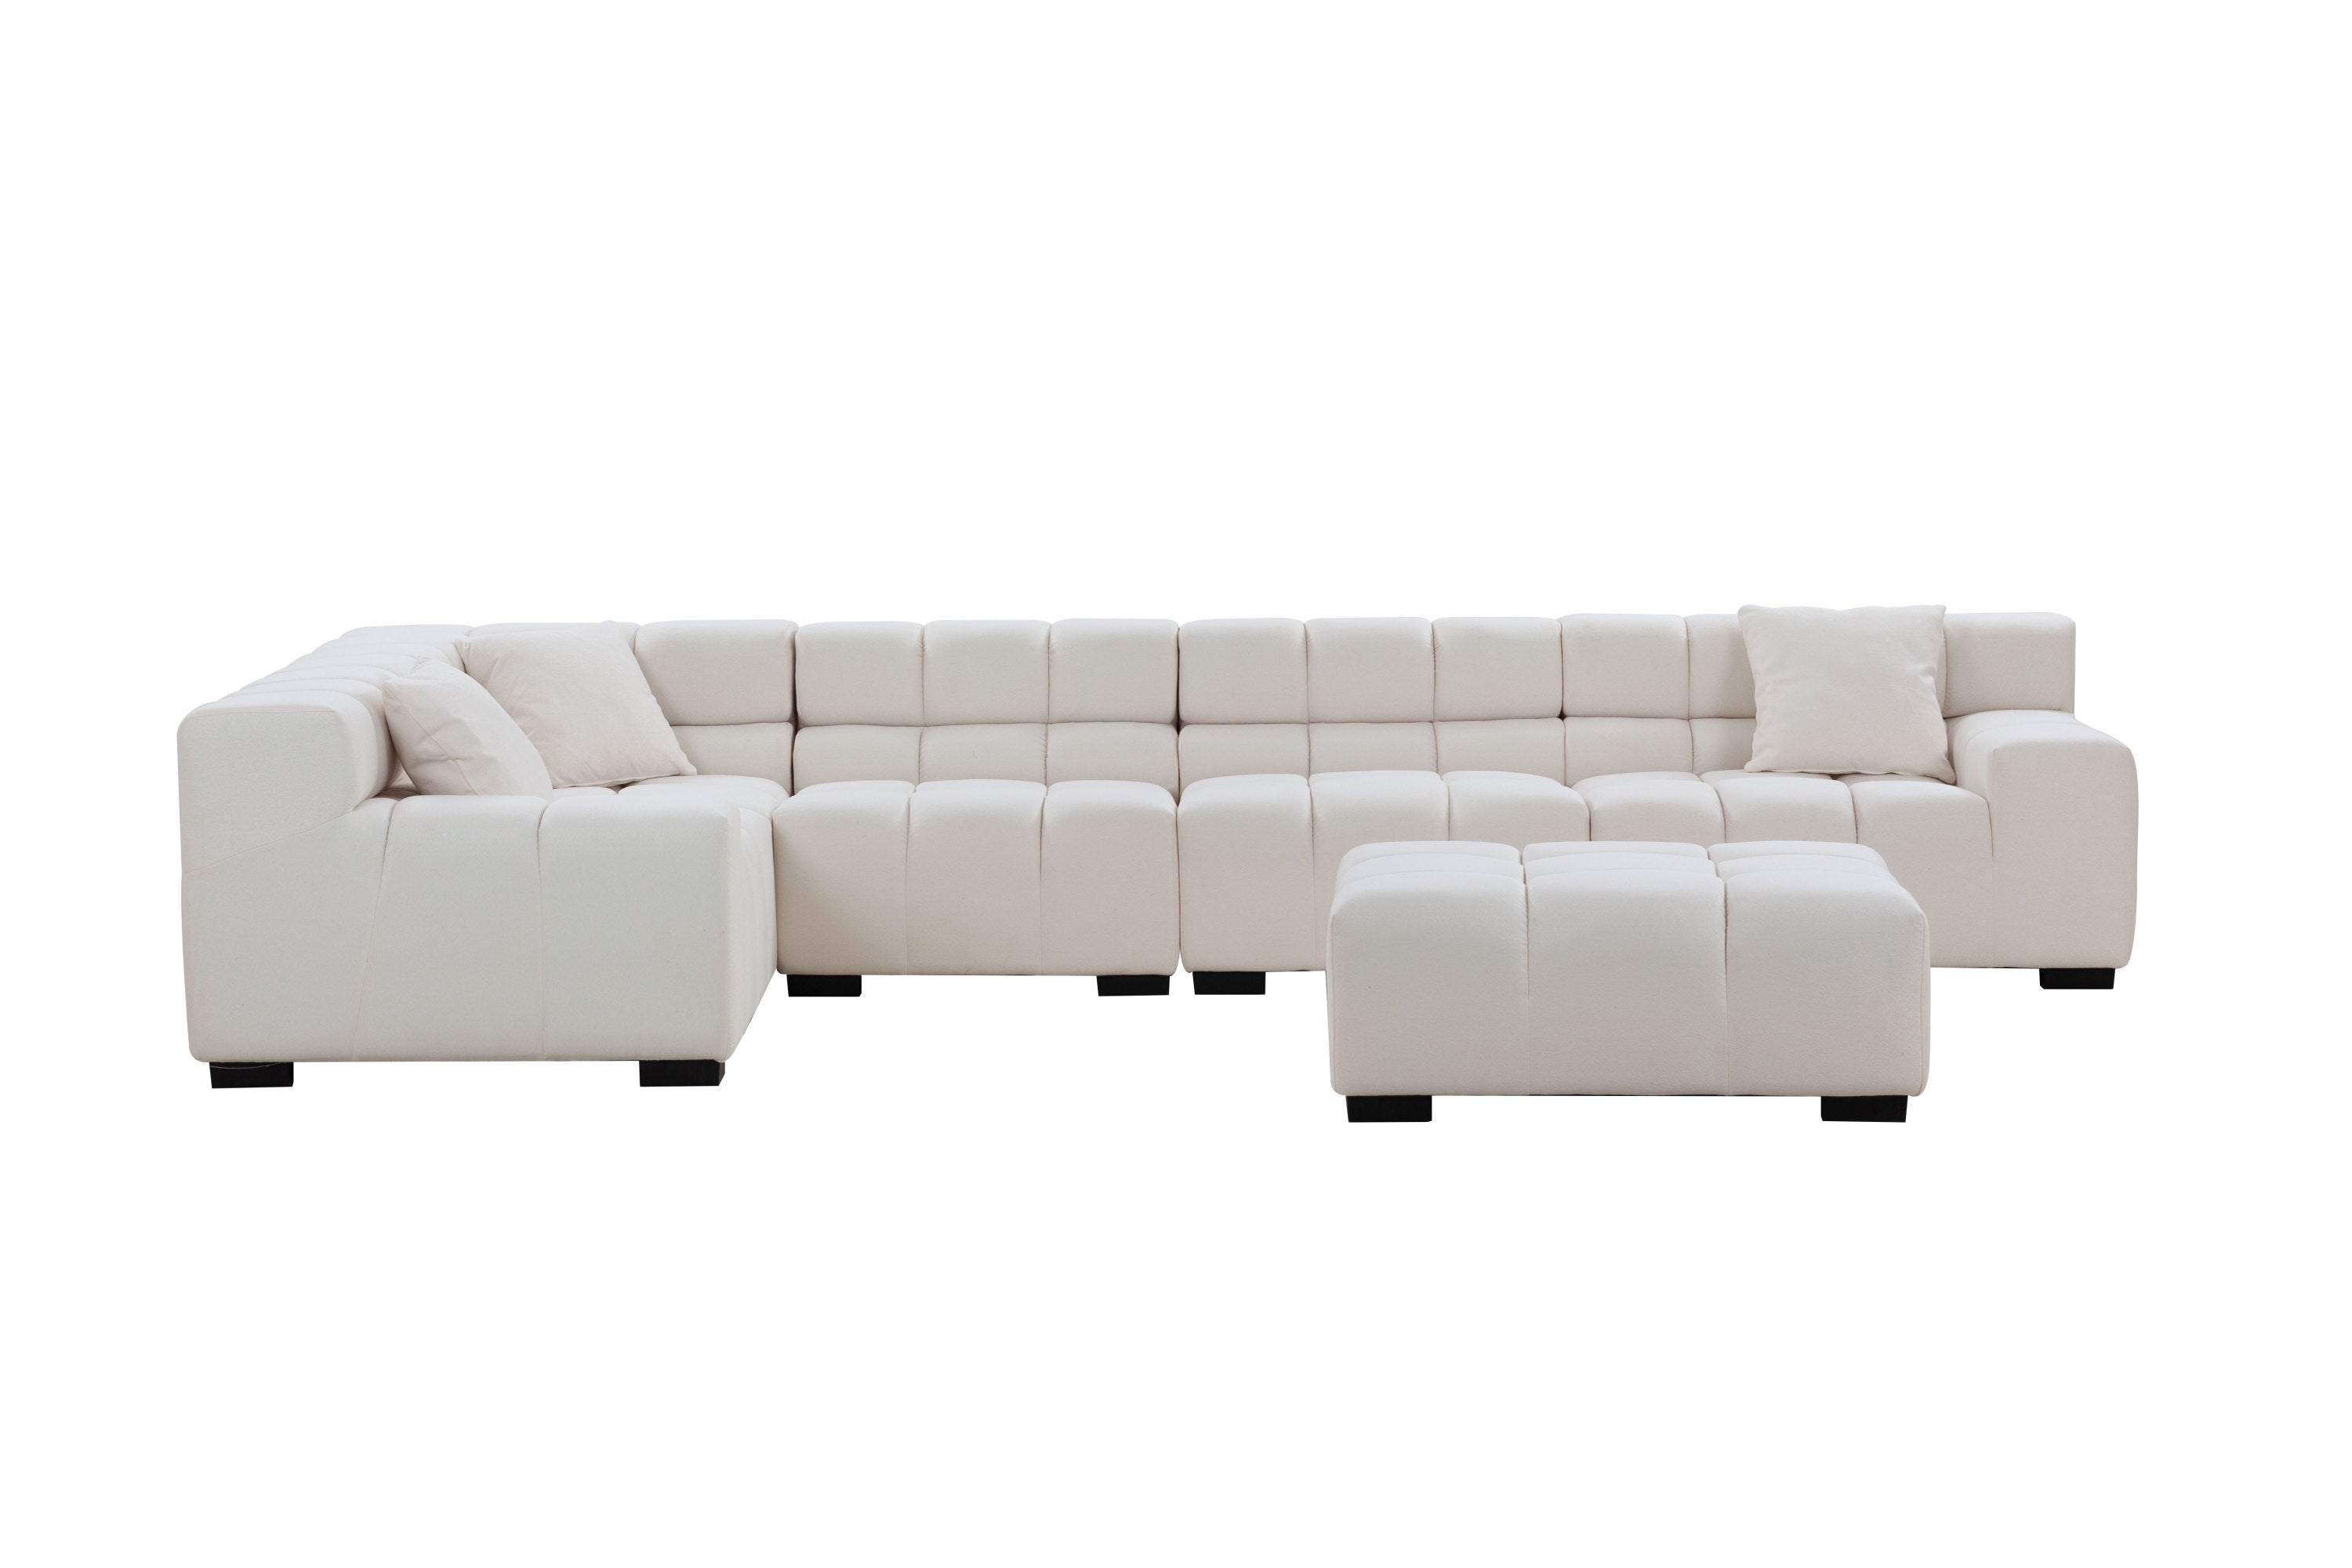 L-Shaped Sectional Sofa Modular Seating Sofa Couch with Ottoman